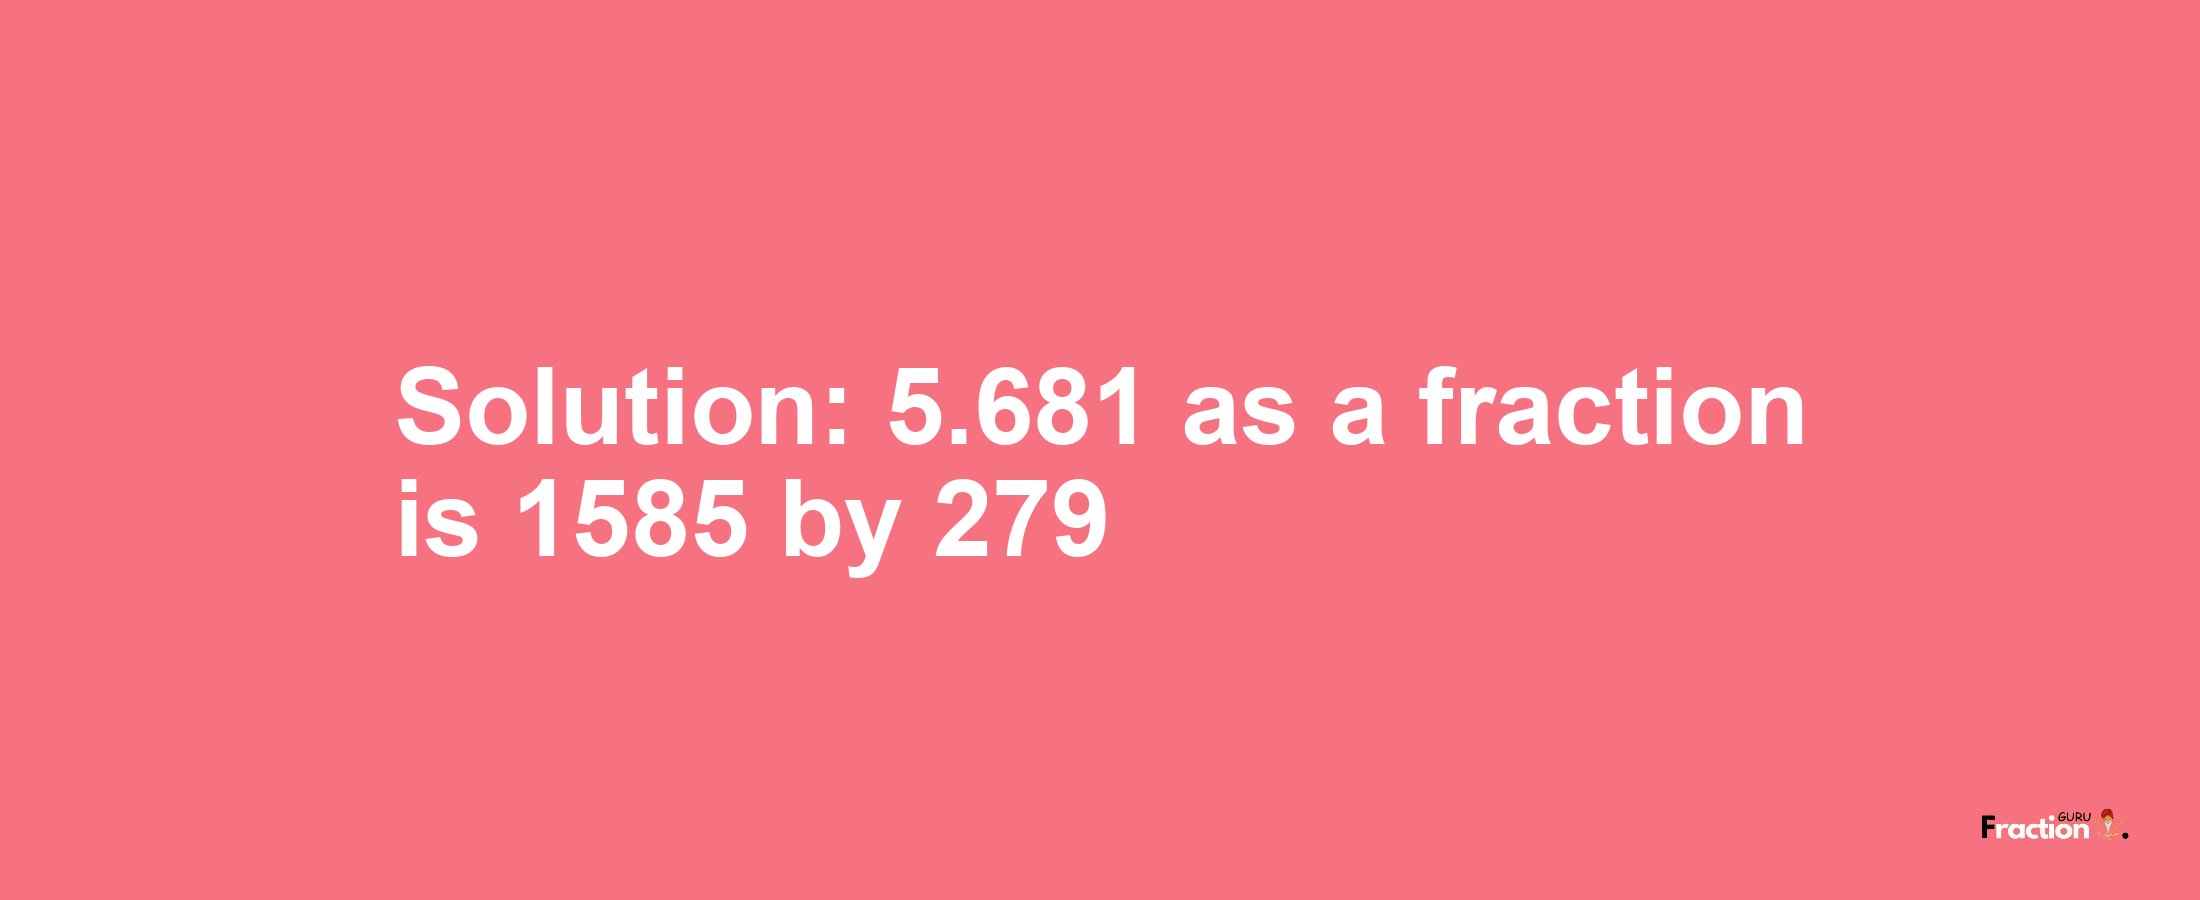 Solution:5.681 as a fraction is 1585/279